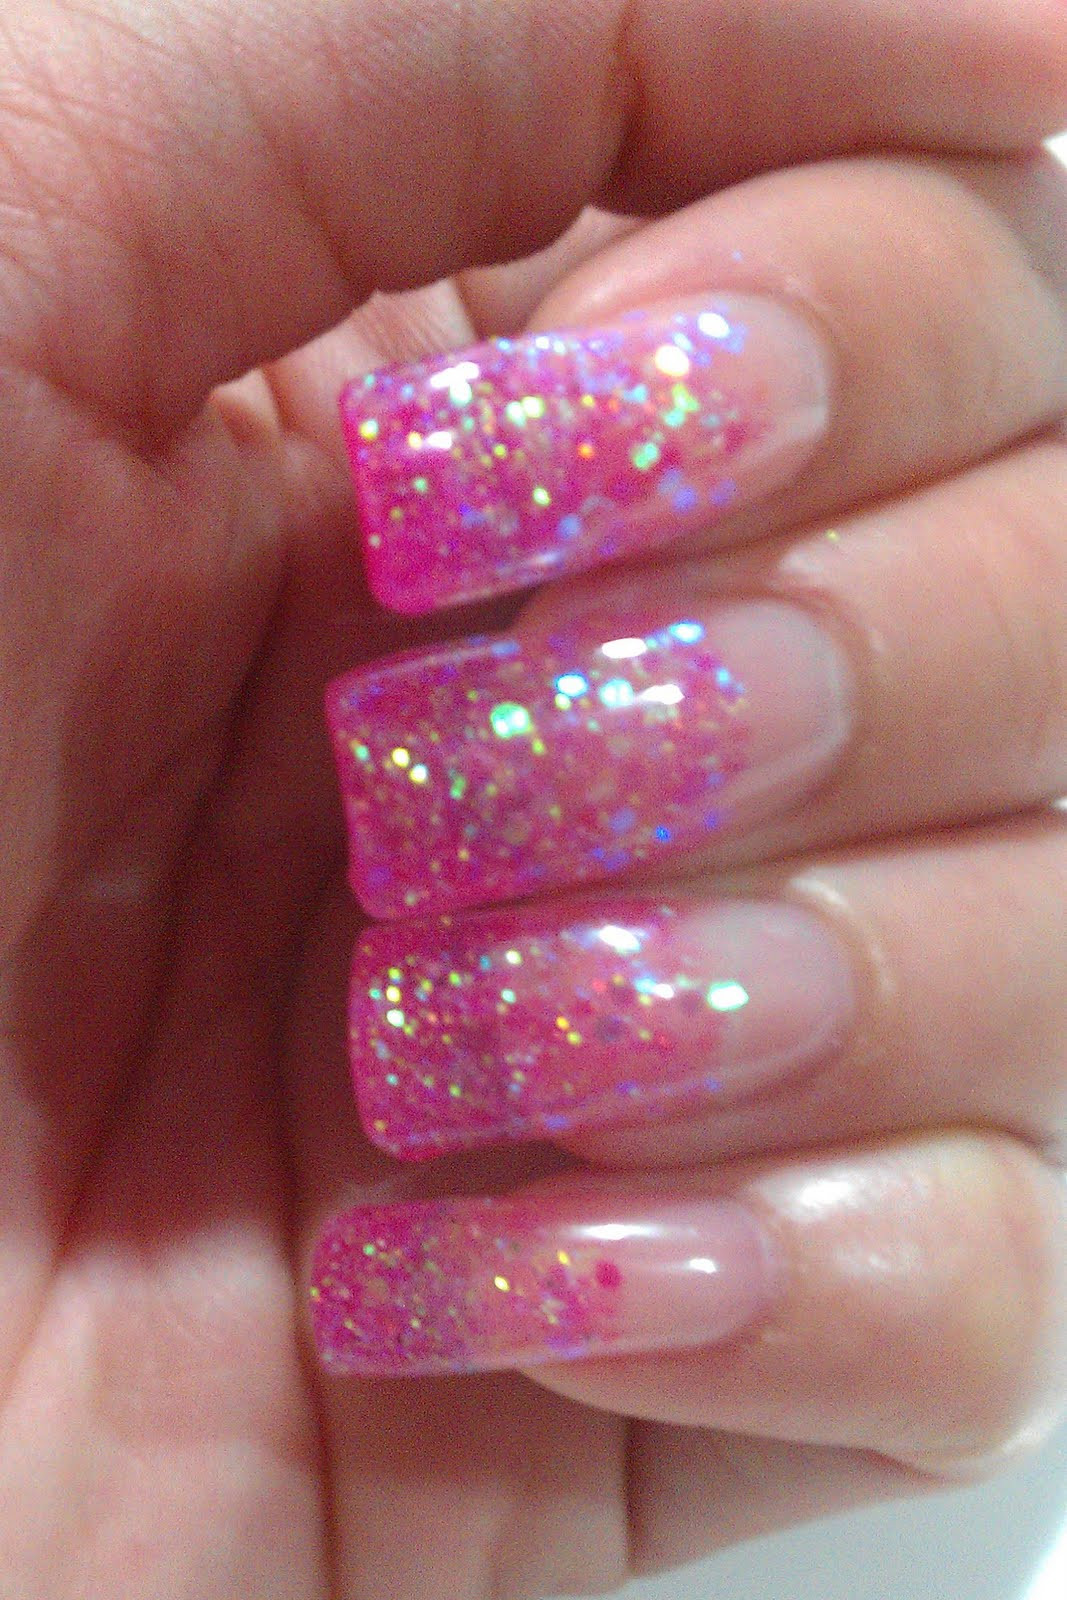 Gel Nails With Glitter Tips
 The Clover Beauty Inn NOTD Pink Glitter Gel Nails